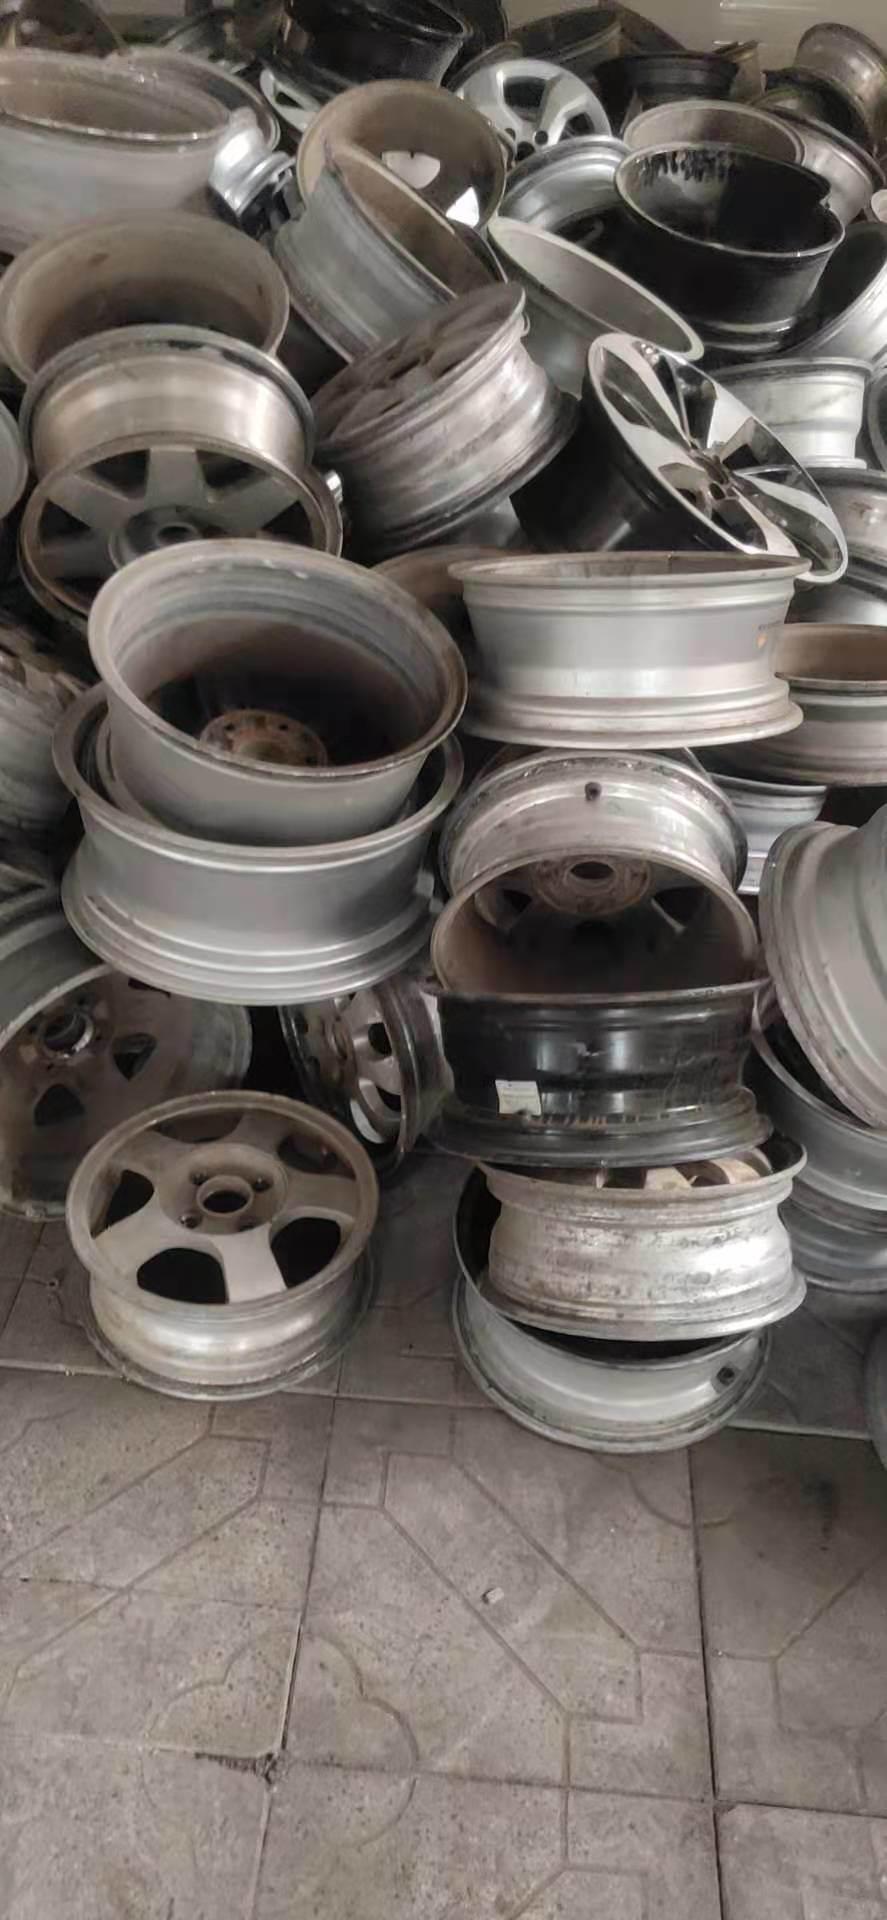 Aluminum Wheel Hub Scrap with a Purity of 99.7%, a High-Quality Product